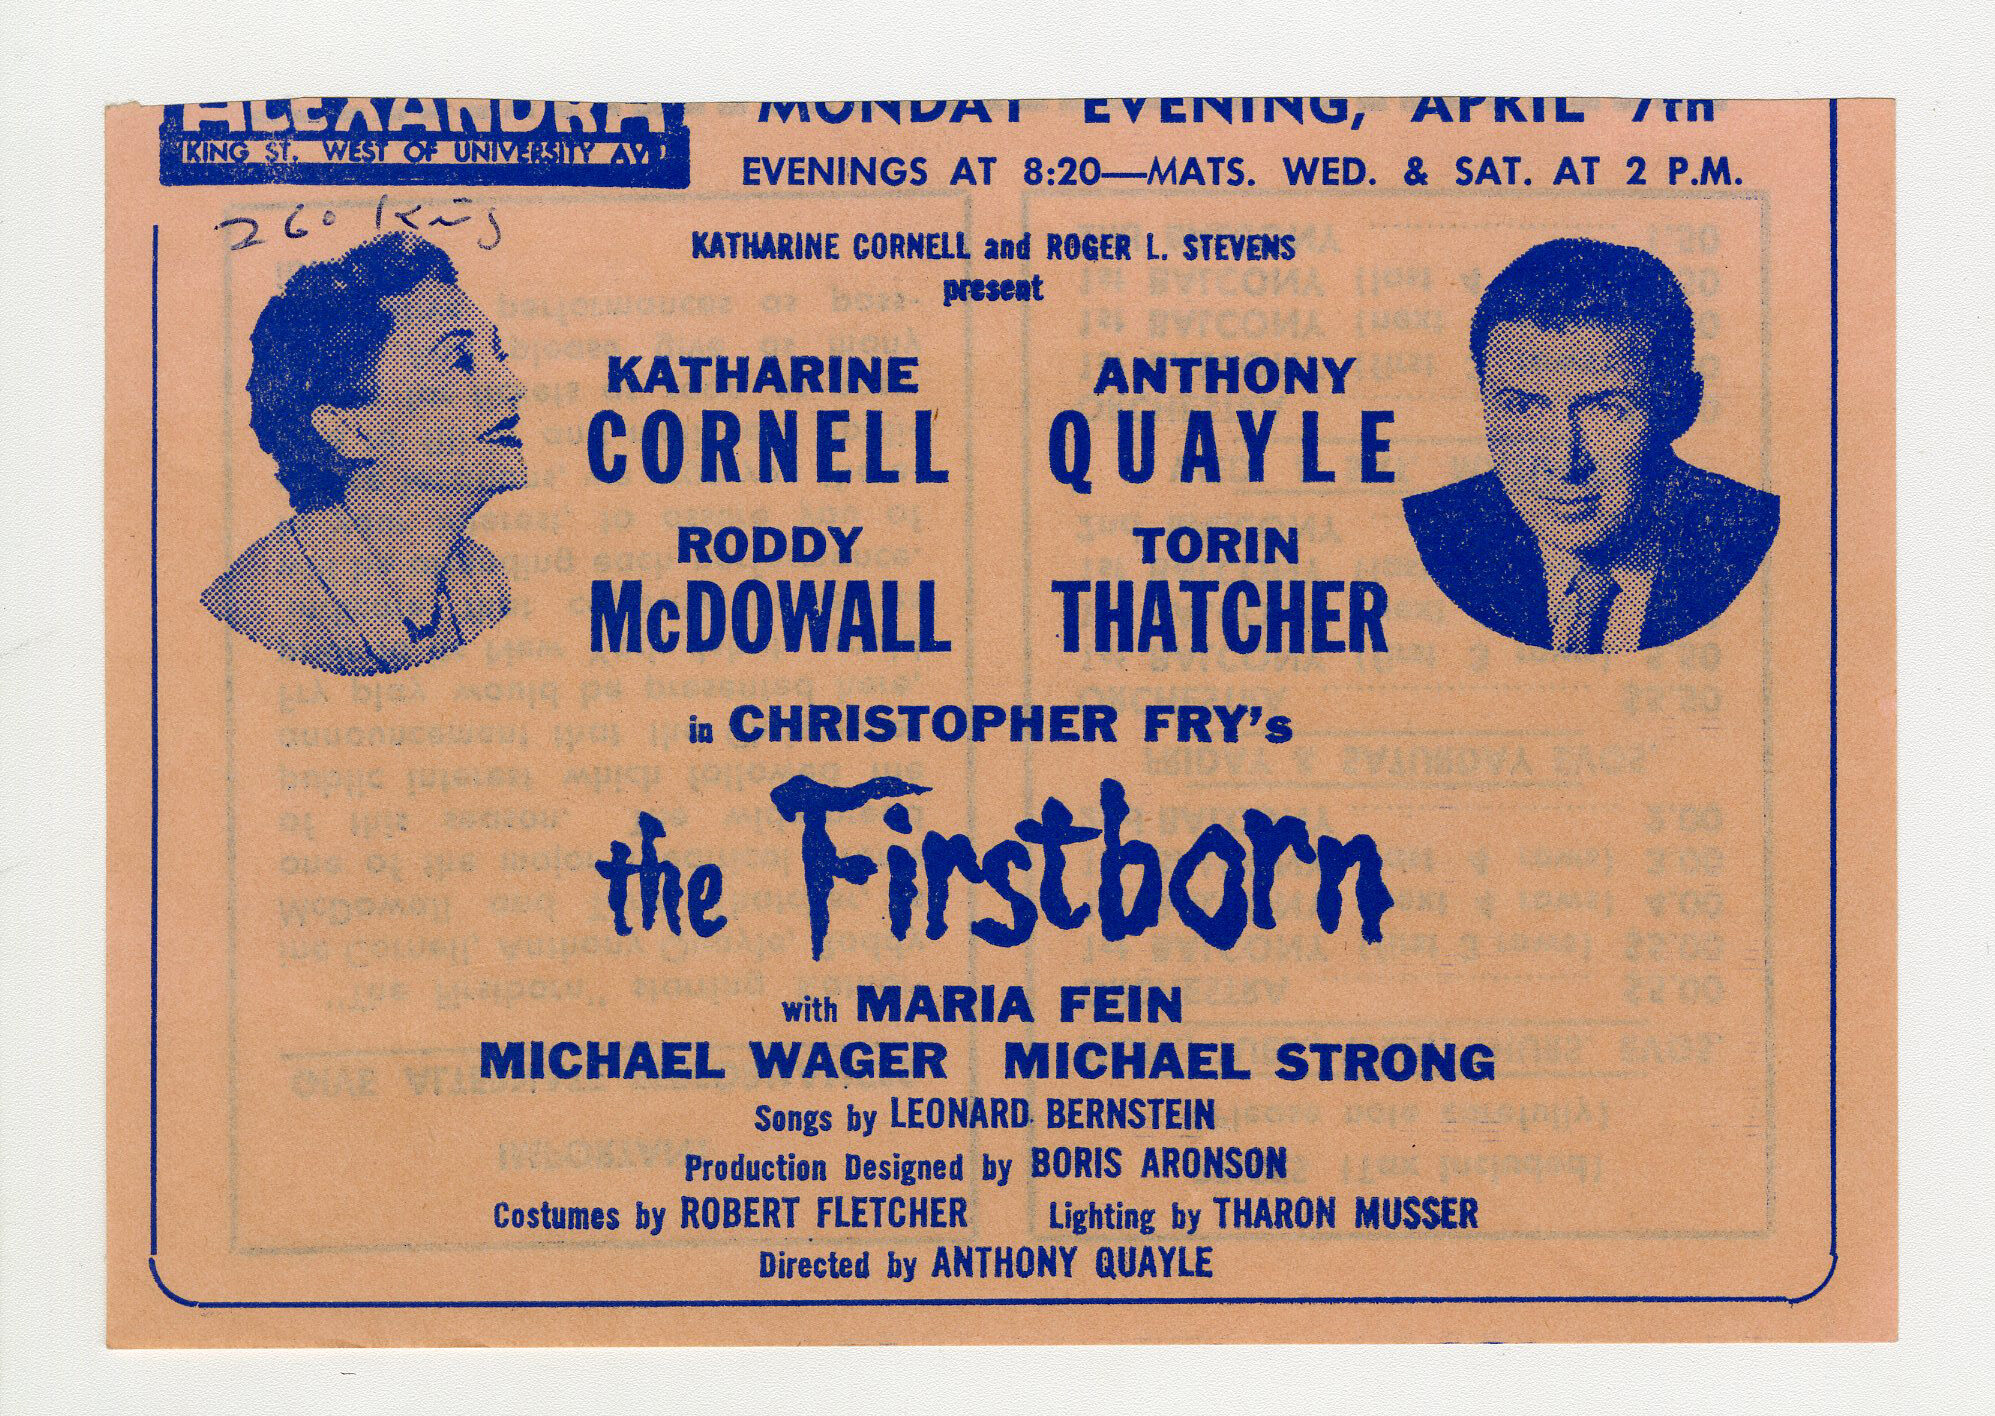 An advertising clipping in dark blue with images of Katherine Cornell and Anthony Quayle and information about the show.